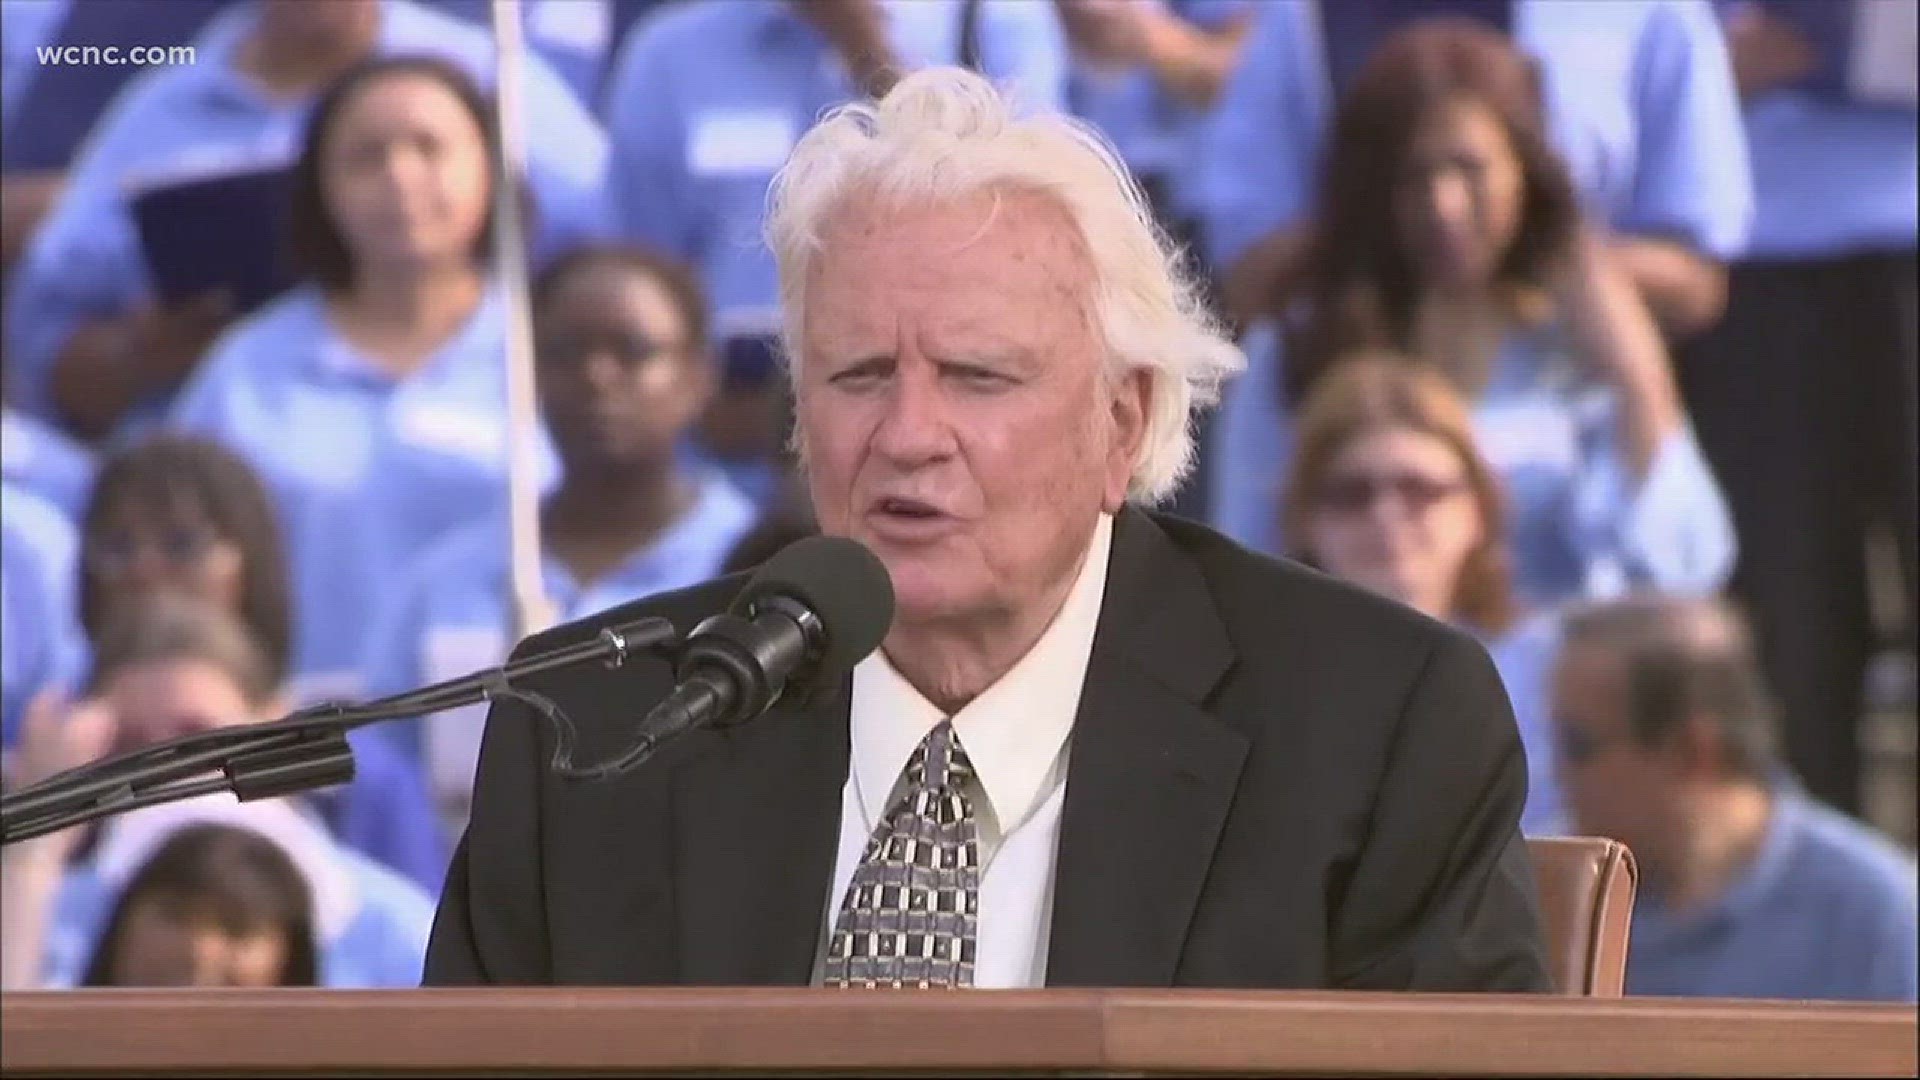 The Carolinas are paying tribute to the late Rev. Billy Graham, who died Wednesday at the age of 99.